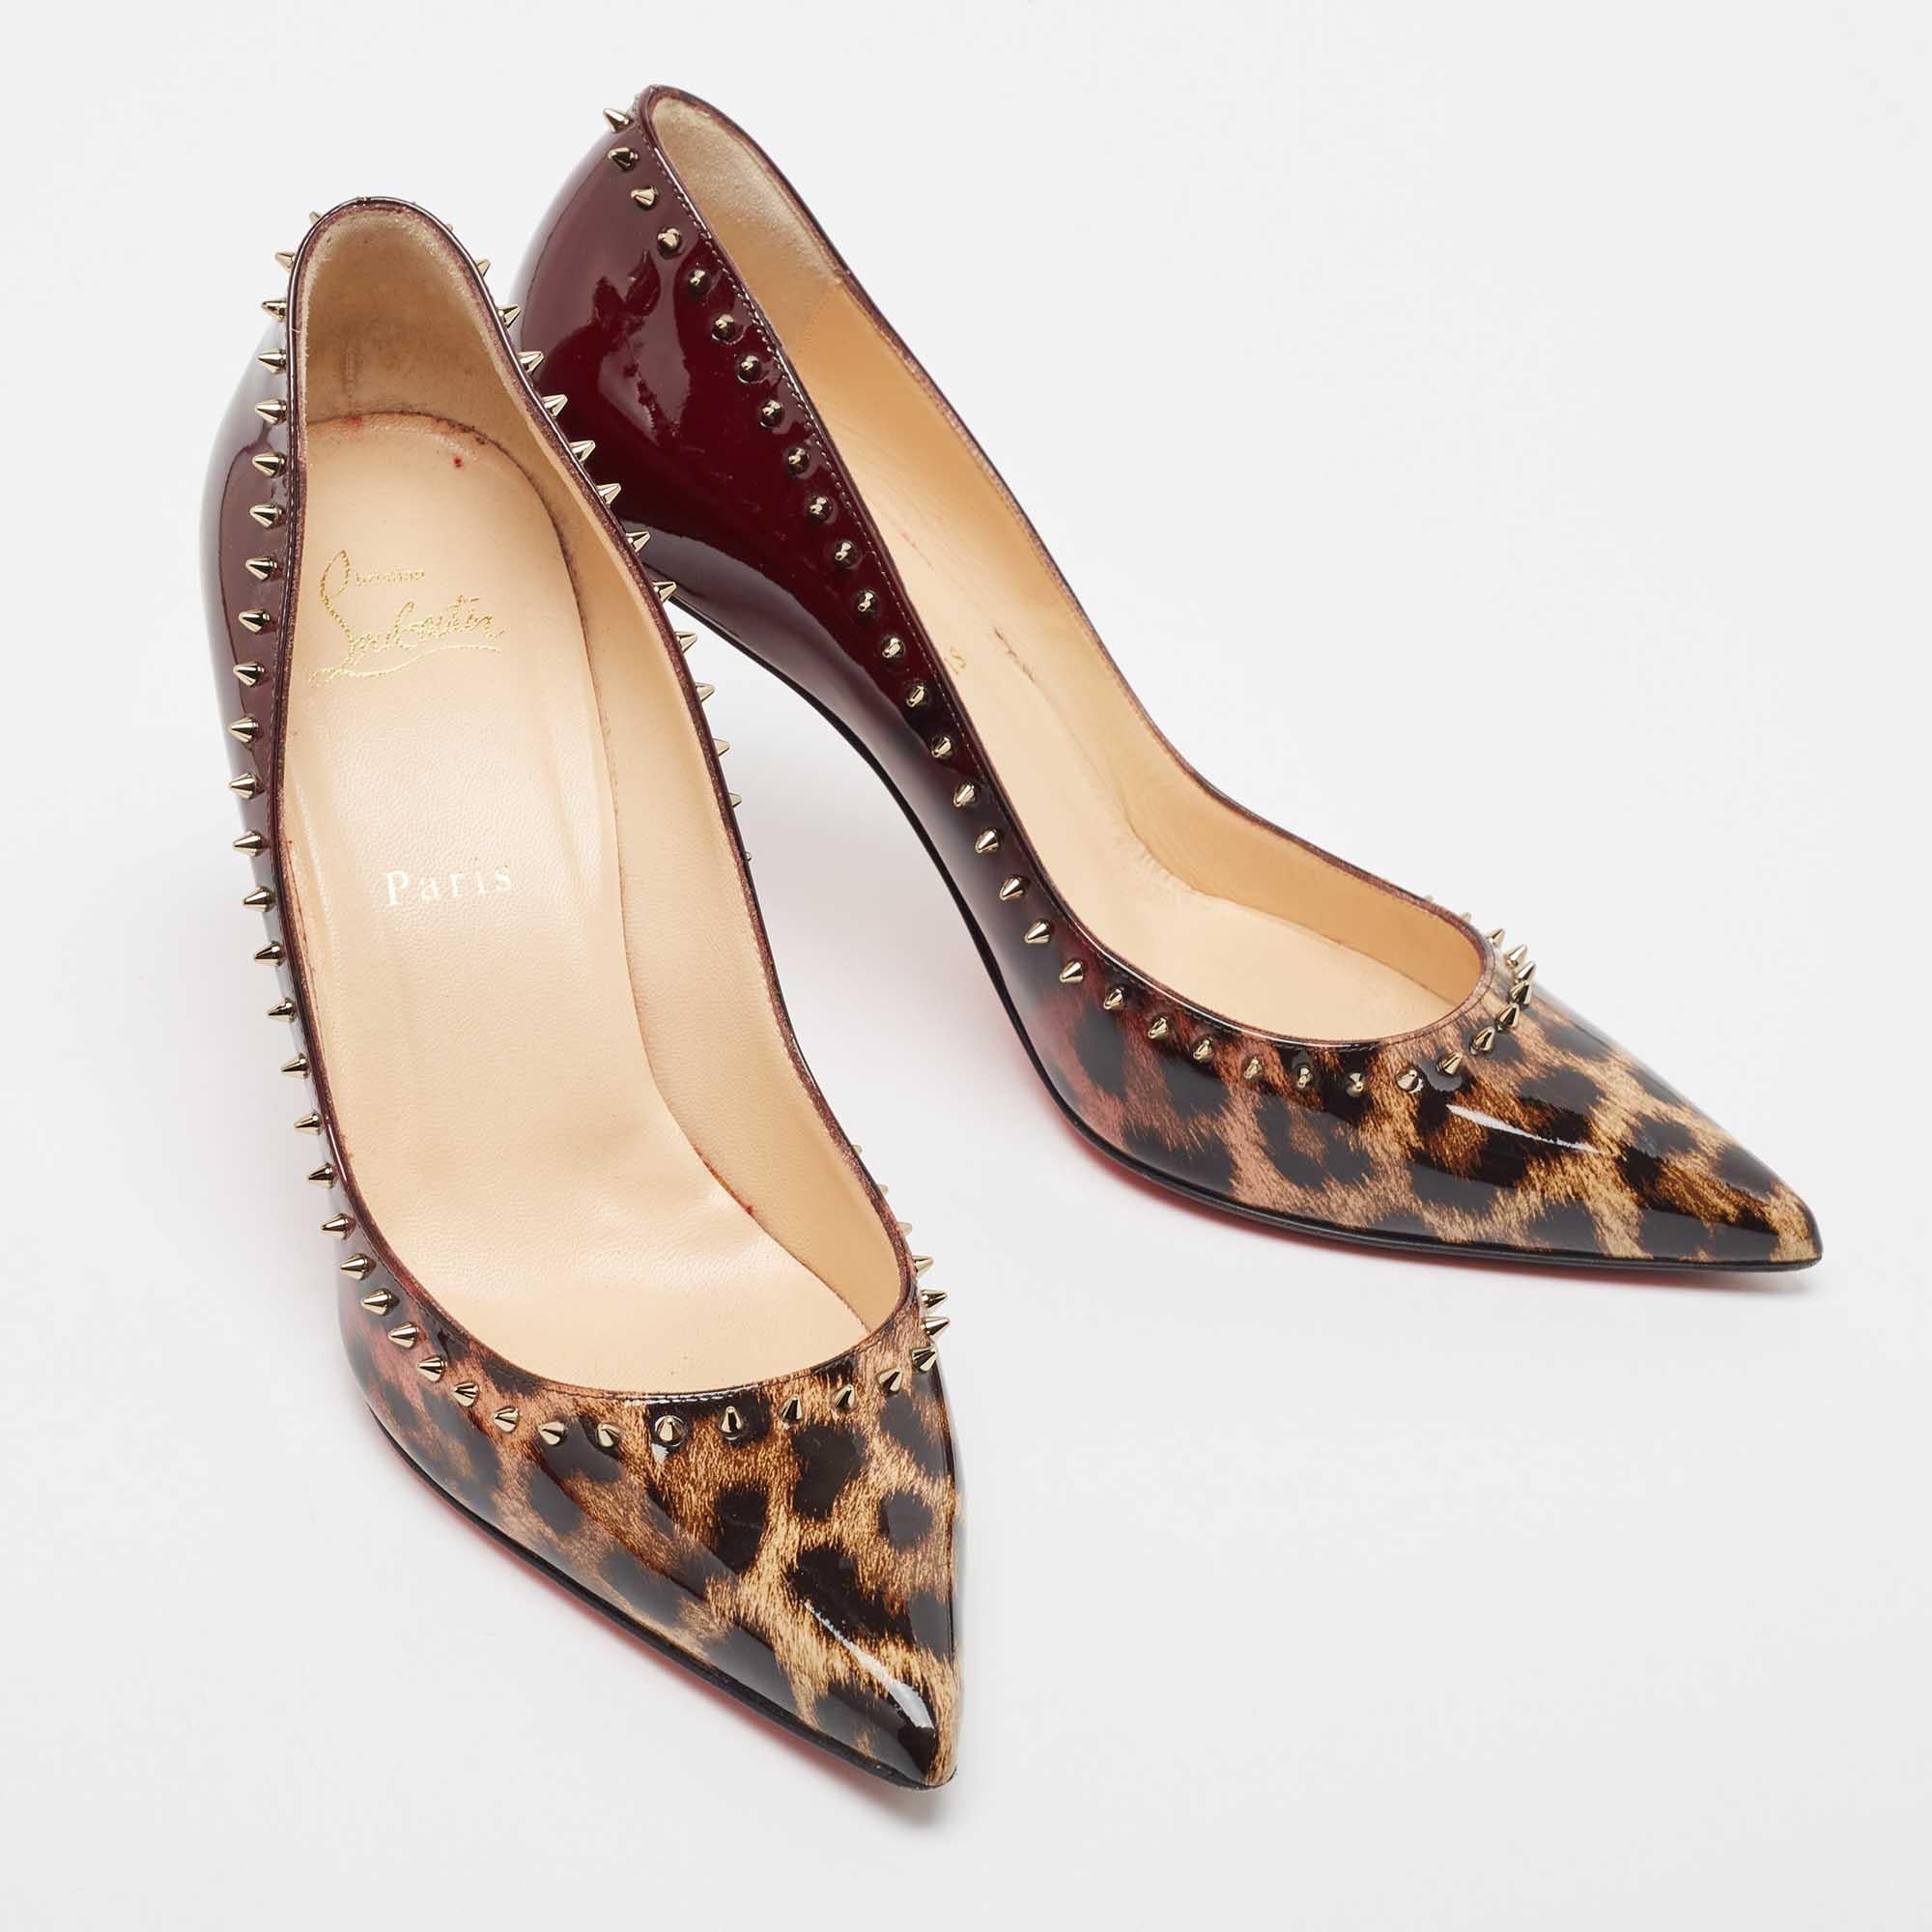 Christian Louboutin Tricolor Ombre Leopard Print Patent Leather Anjalina Pumps S 1